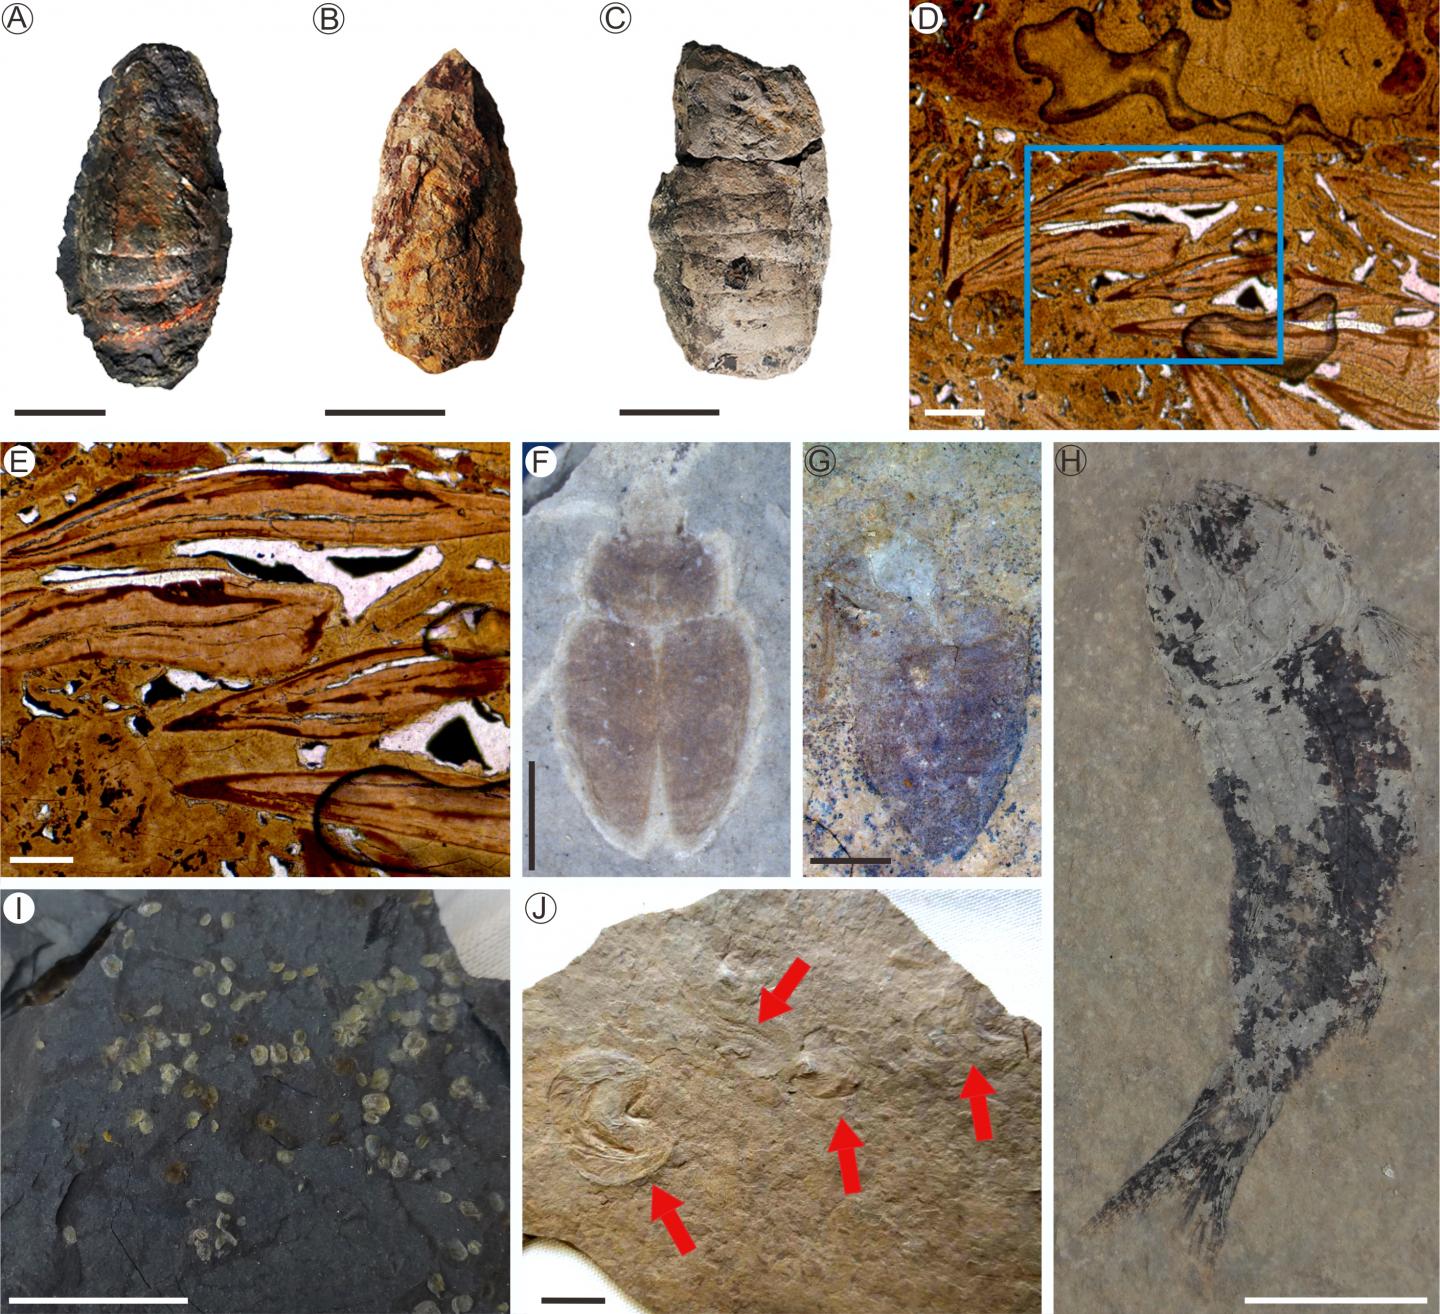 Representative Fossils from the Organic-Rich Shale and Mudstone of the Tongchuan Formation